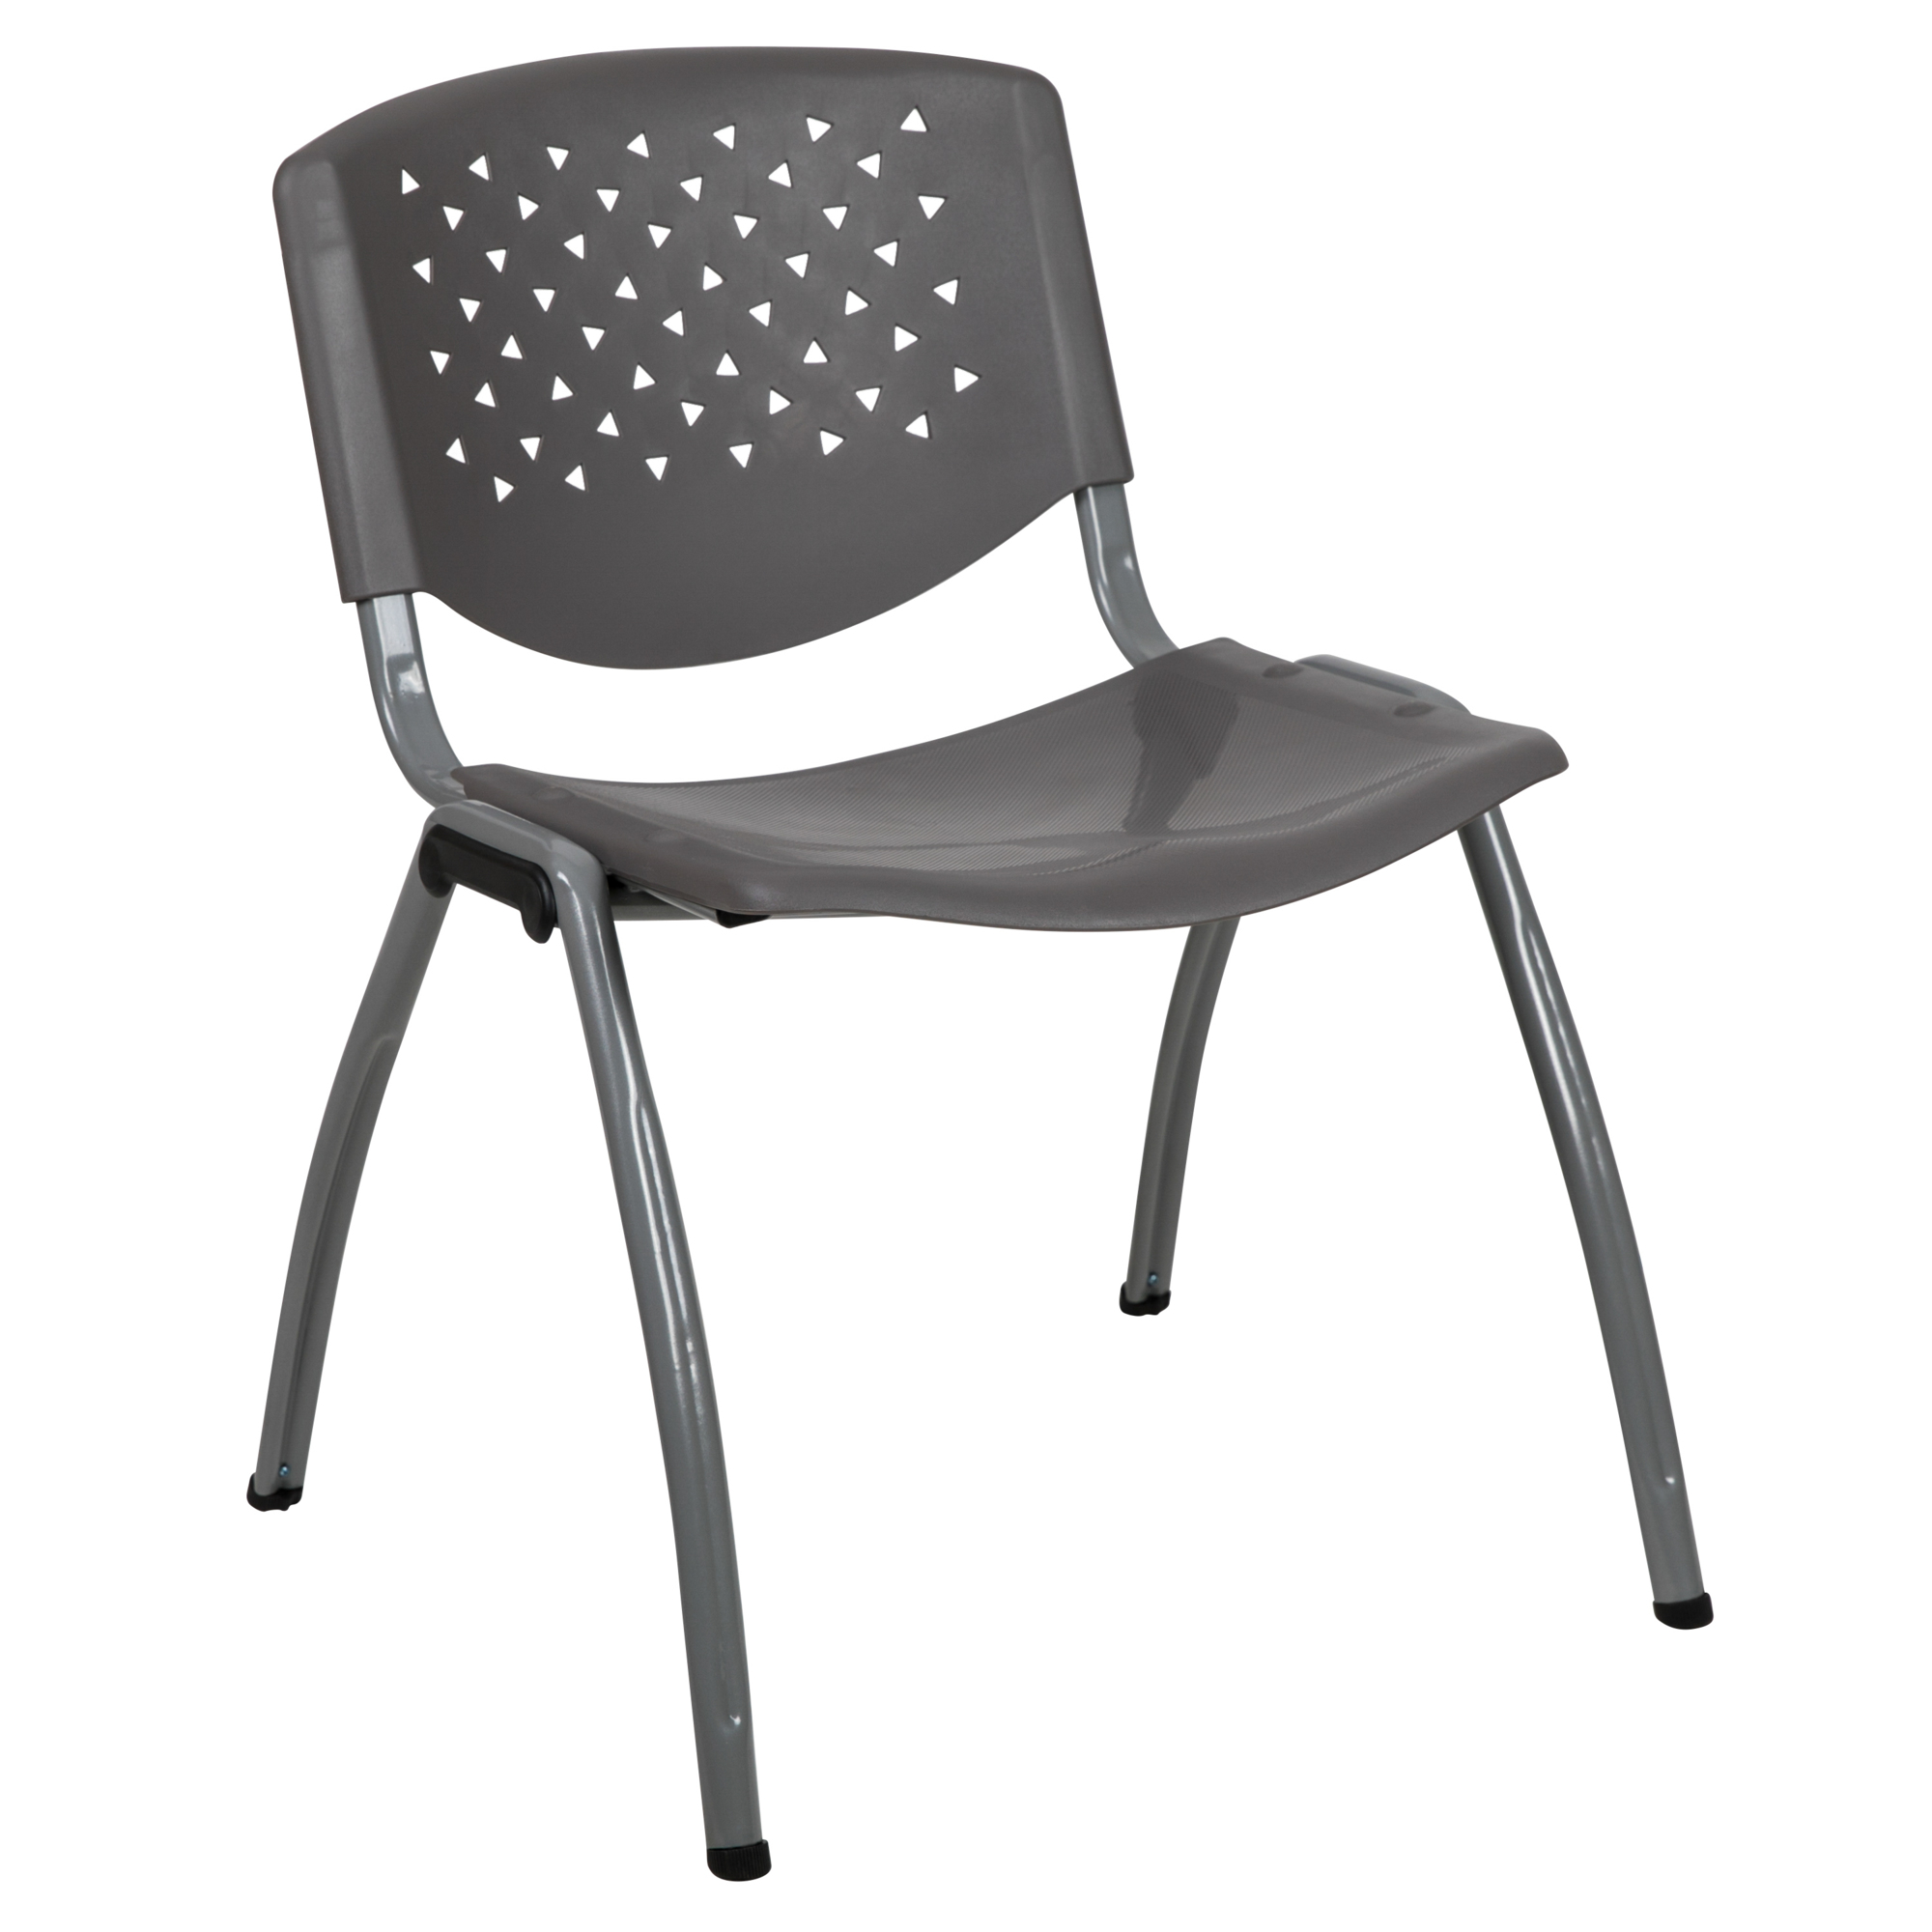 Flash Furniture, Gray Plastic Stack Chair with Perforated Back, Primary Color Gray, Included (qty.) 1, Model RUTF01AGY